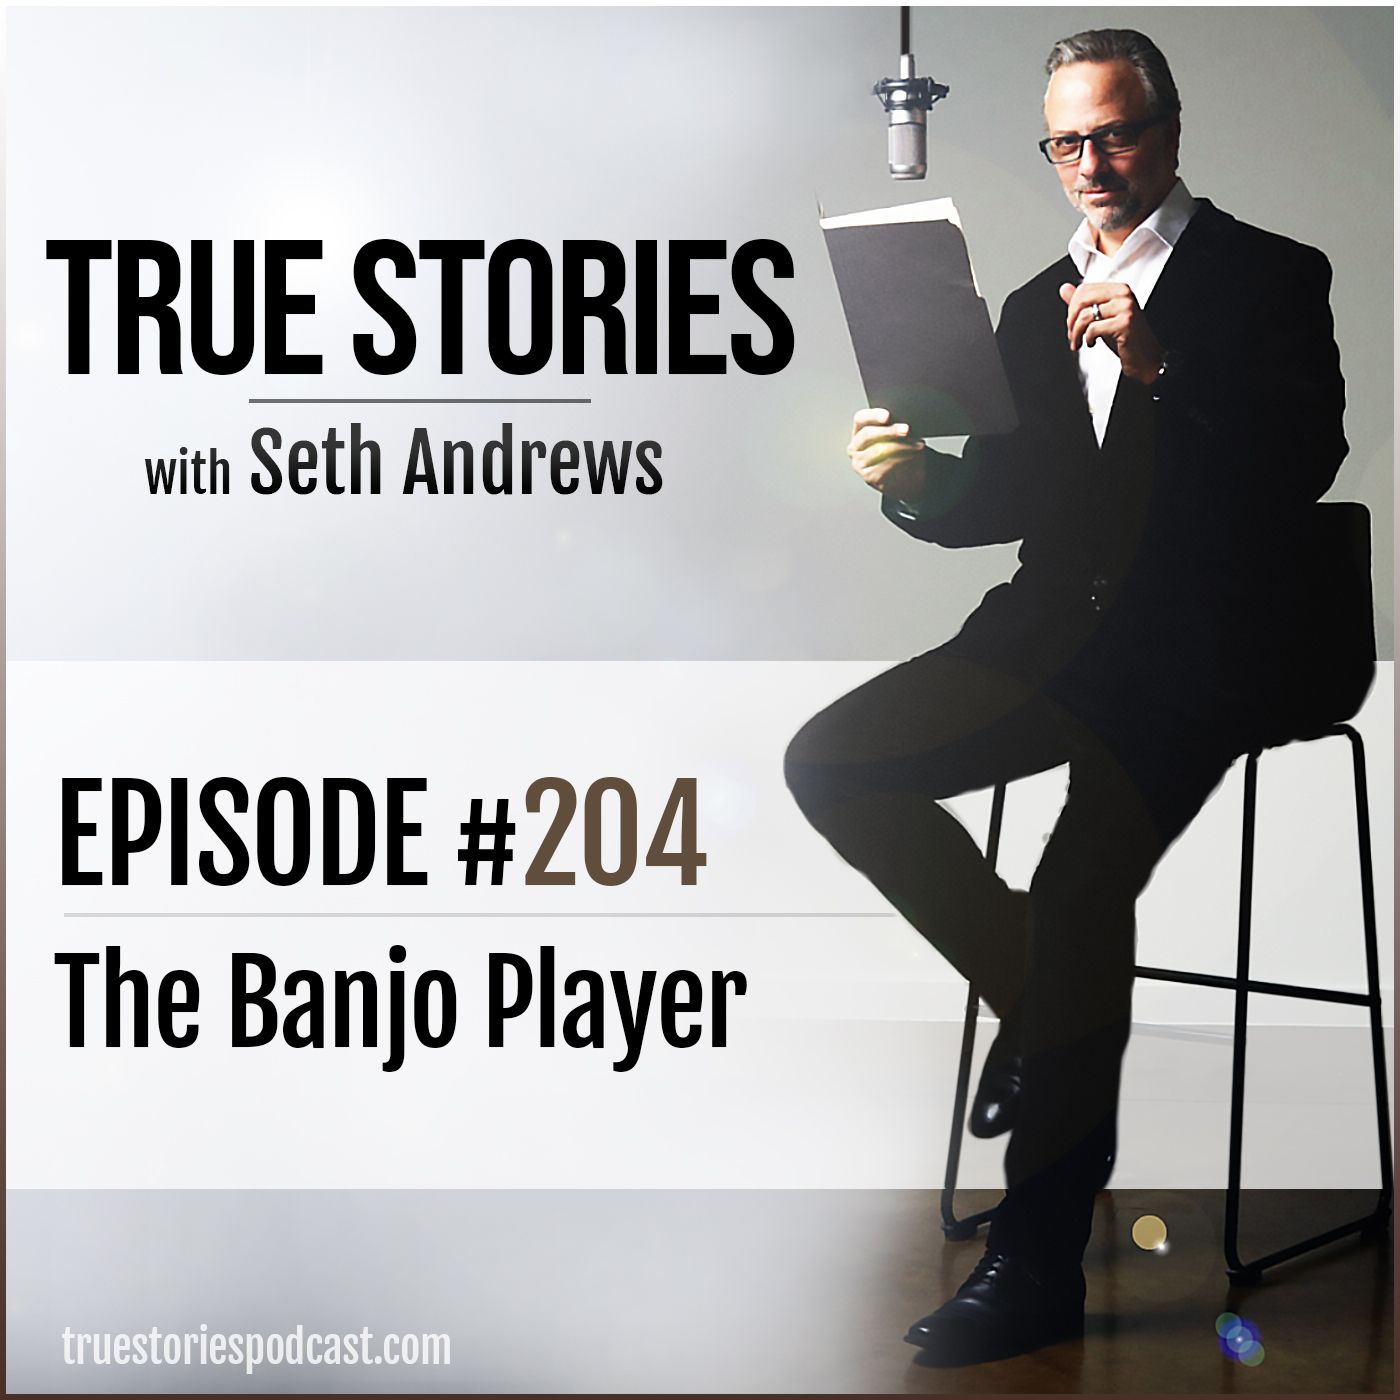 True Stories #204 - The Banjo Player